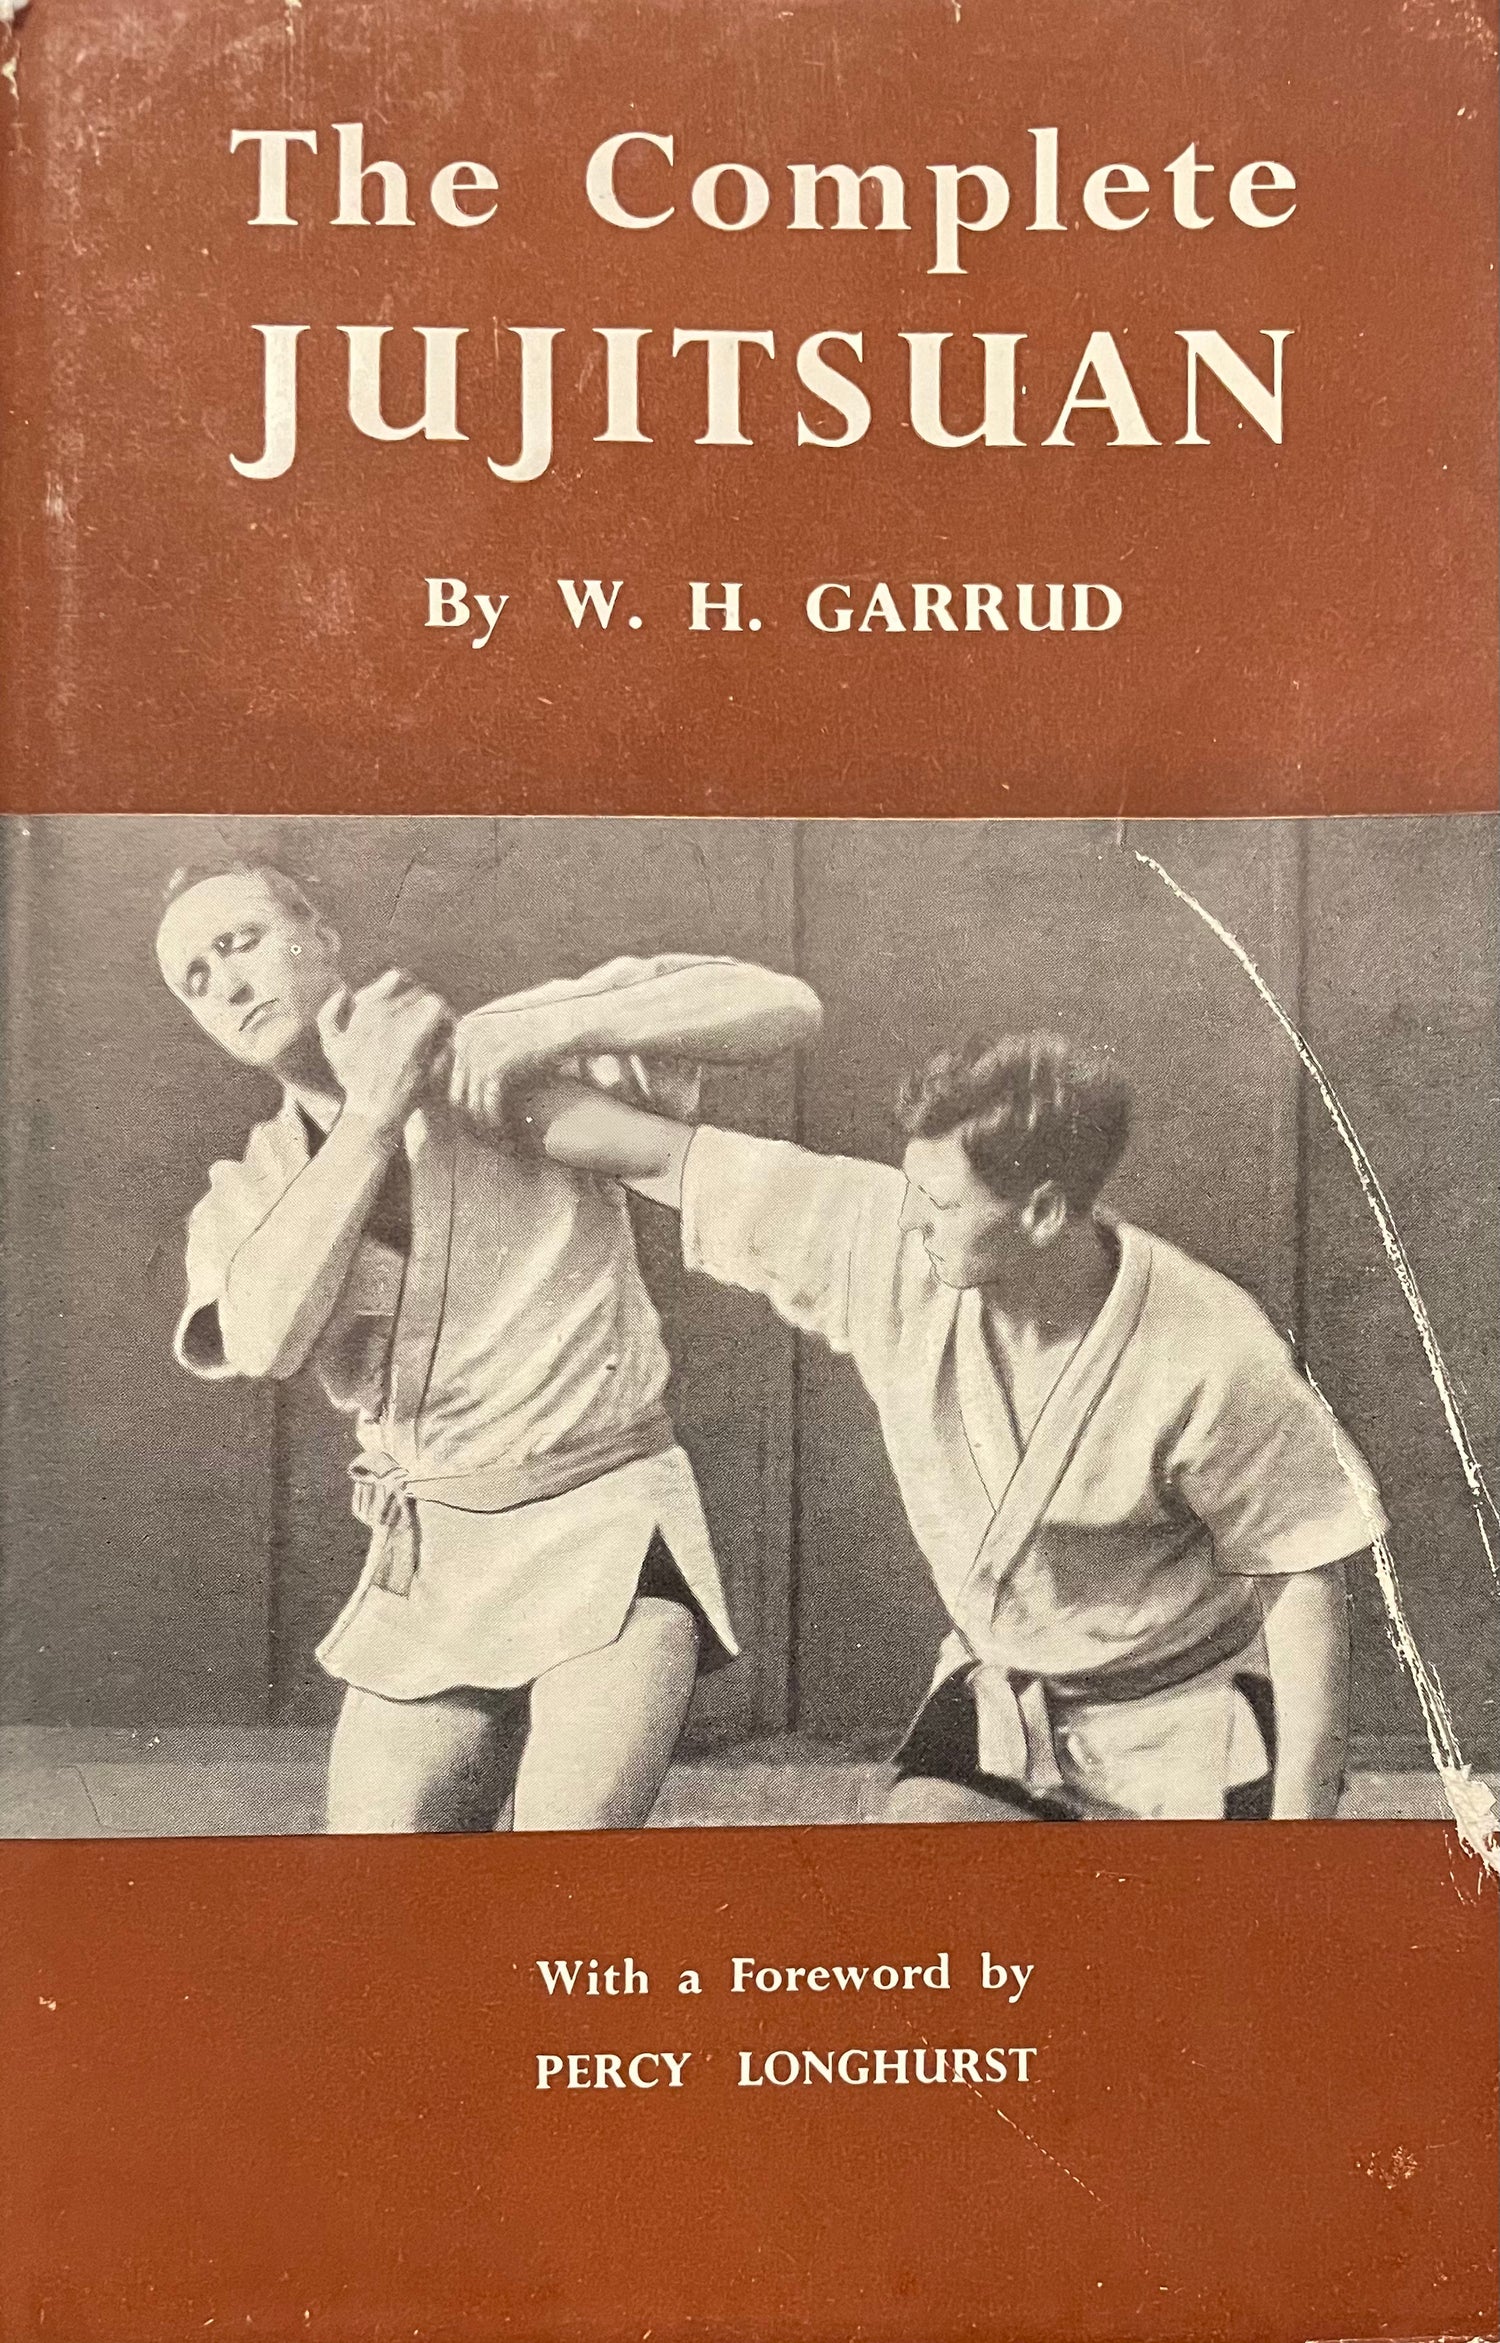 The Complete Jujitsuan Book by William Garrud (Hardcover) (Preowned)